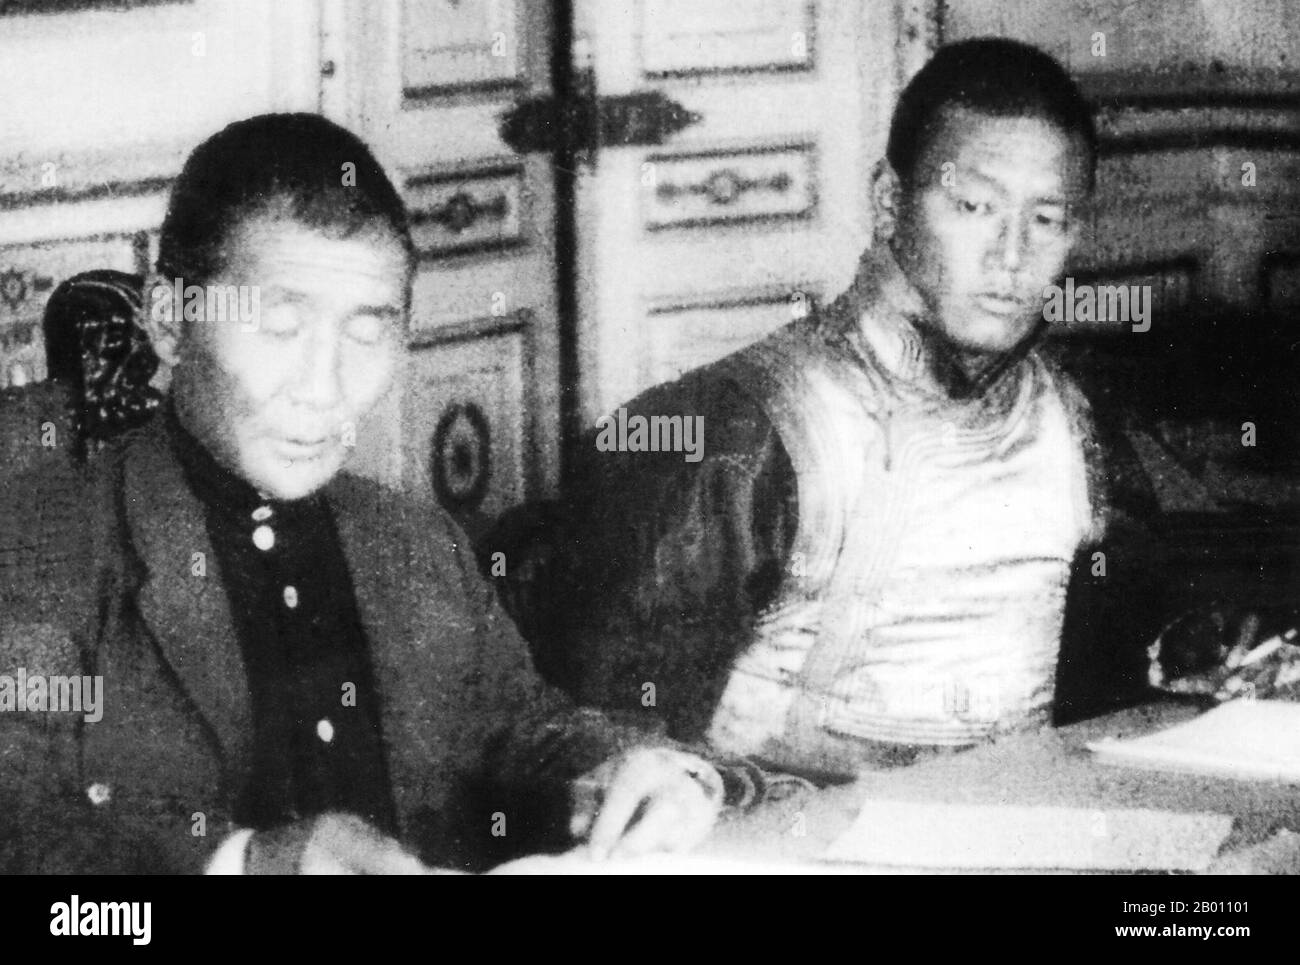 Mongolia: Damdin Sukhbaatar (1893-1923, right) together with Soliin Danzan (1885 – 1924, left), 1921.  Damdin Sukhbaatar (February 2, 1893 - February 20, 1923) was a Mongolian military leader in the 1921 revolution. Mongolian representative S. Danzan and D. Sukhbaatar (as Mongolian War Minister) were sent by Bogd Khan as negotiaters to the first Mongolian international agreement since the ousting of Chinese occupiers during the Mongolian national revolution of 1921. Soliin Danzan (1885 – 1924) was a Mongolian revolutionary and chairman of the Central Committee of the Mongolian People's Revolut Stock Photo